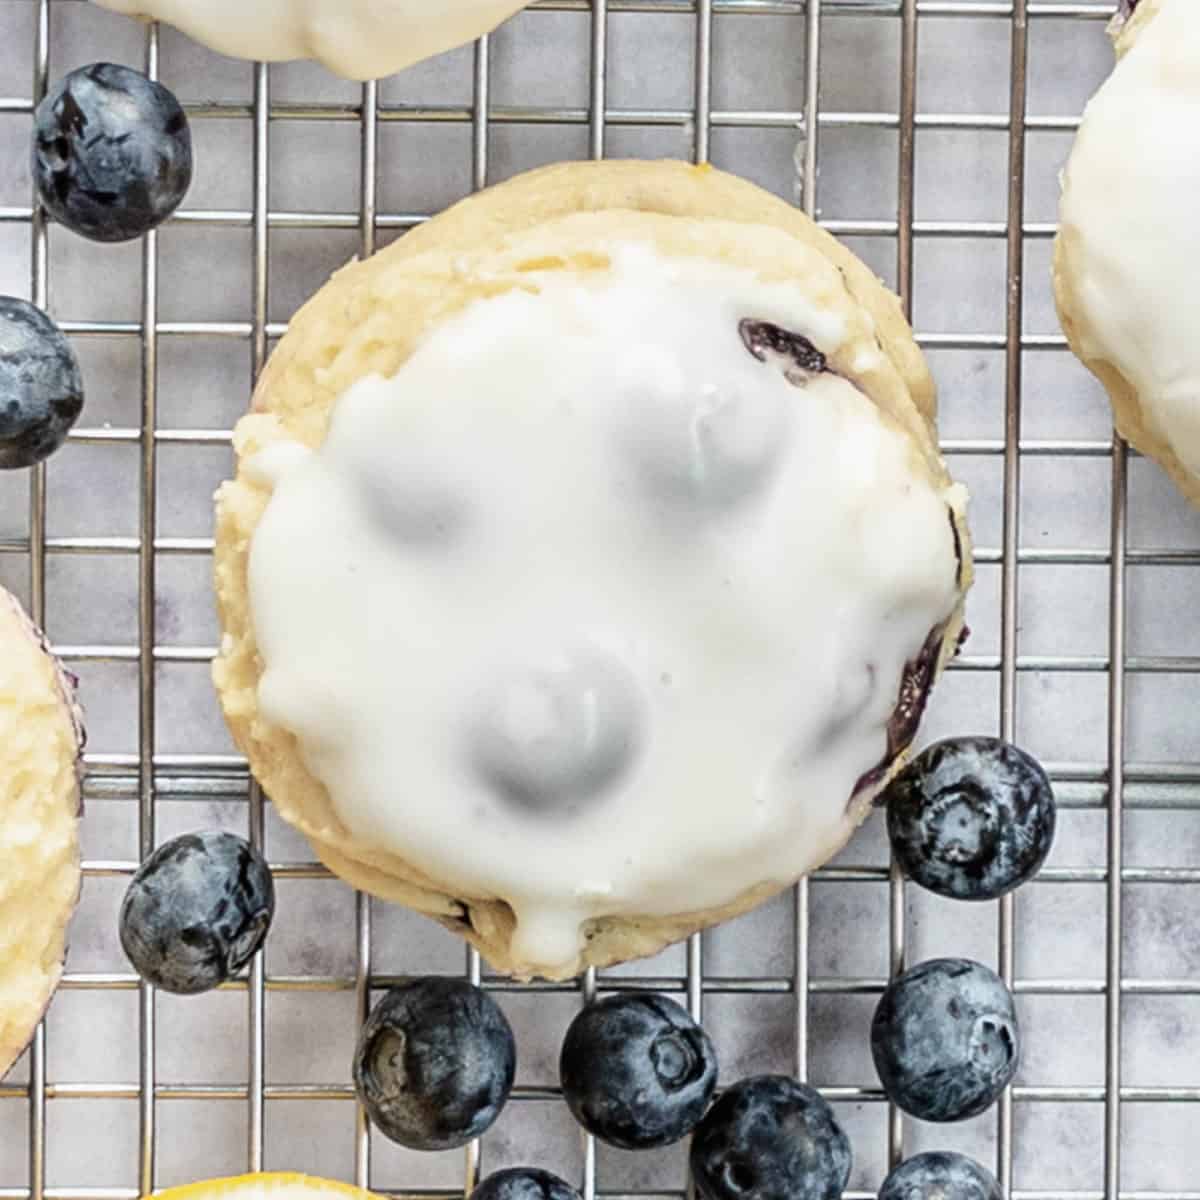 A lemon cookie with blueberries up close.